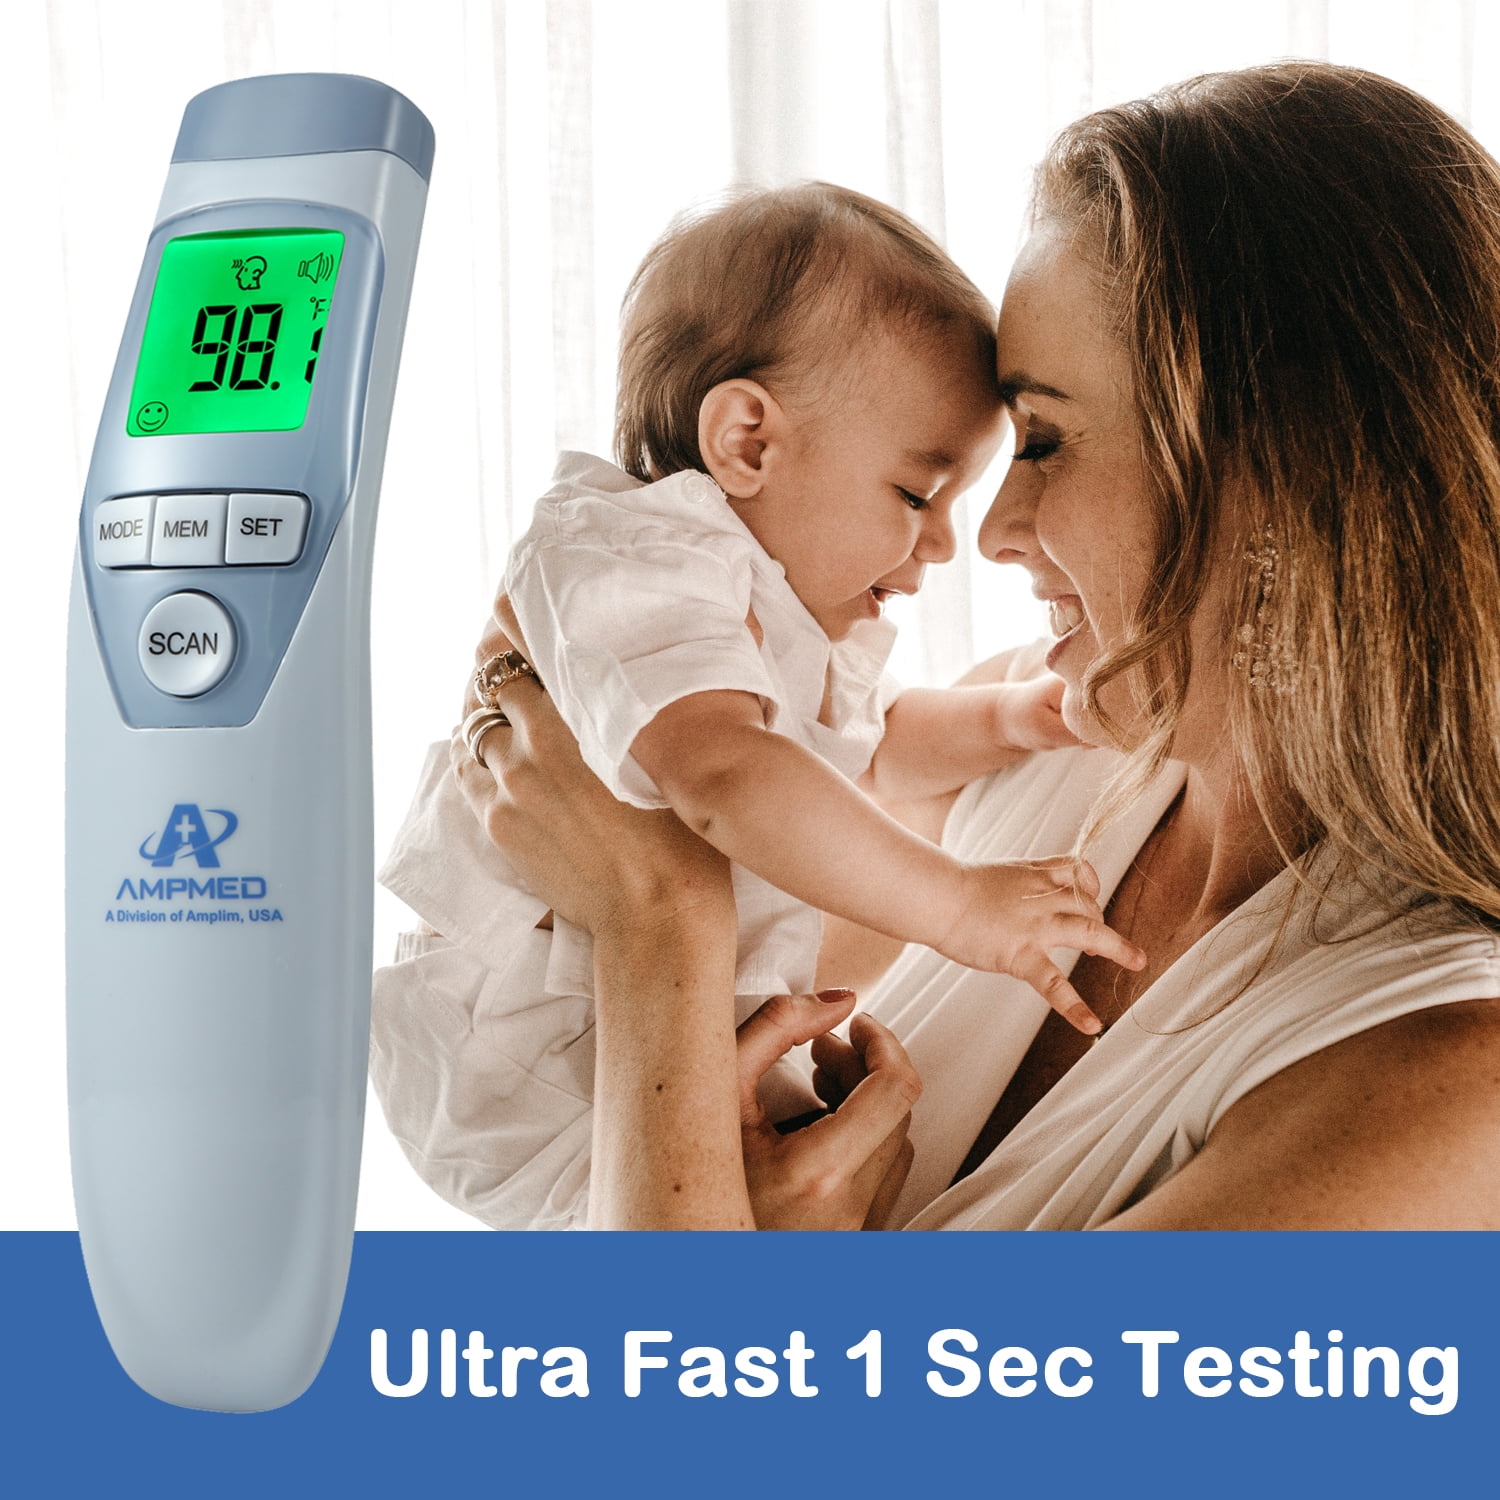 Amplim Non-Contact Forehead Thermometer, 2021 Touchless Digital IR Infrared Thermometer for Baby, Kids and Adults, FSA HSA Approved, Hospital Grade, Blue